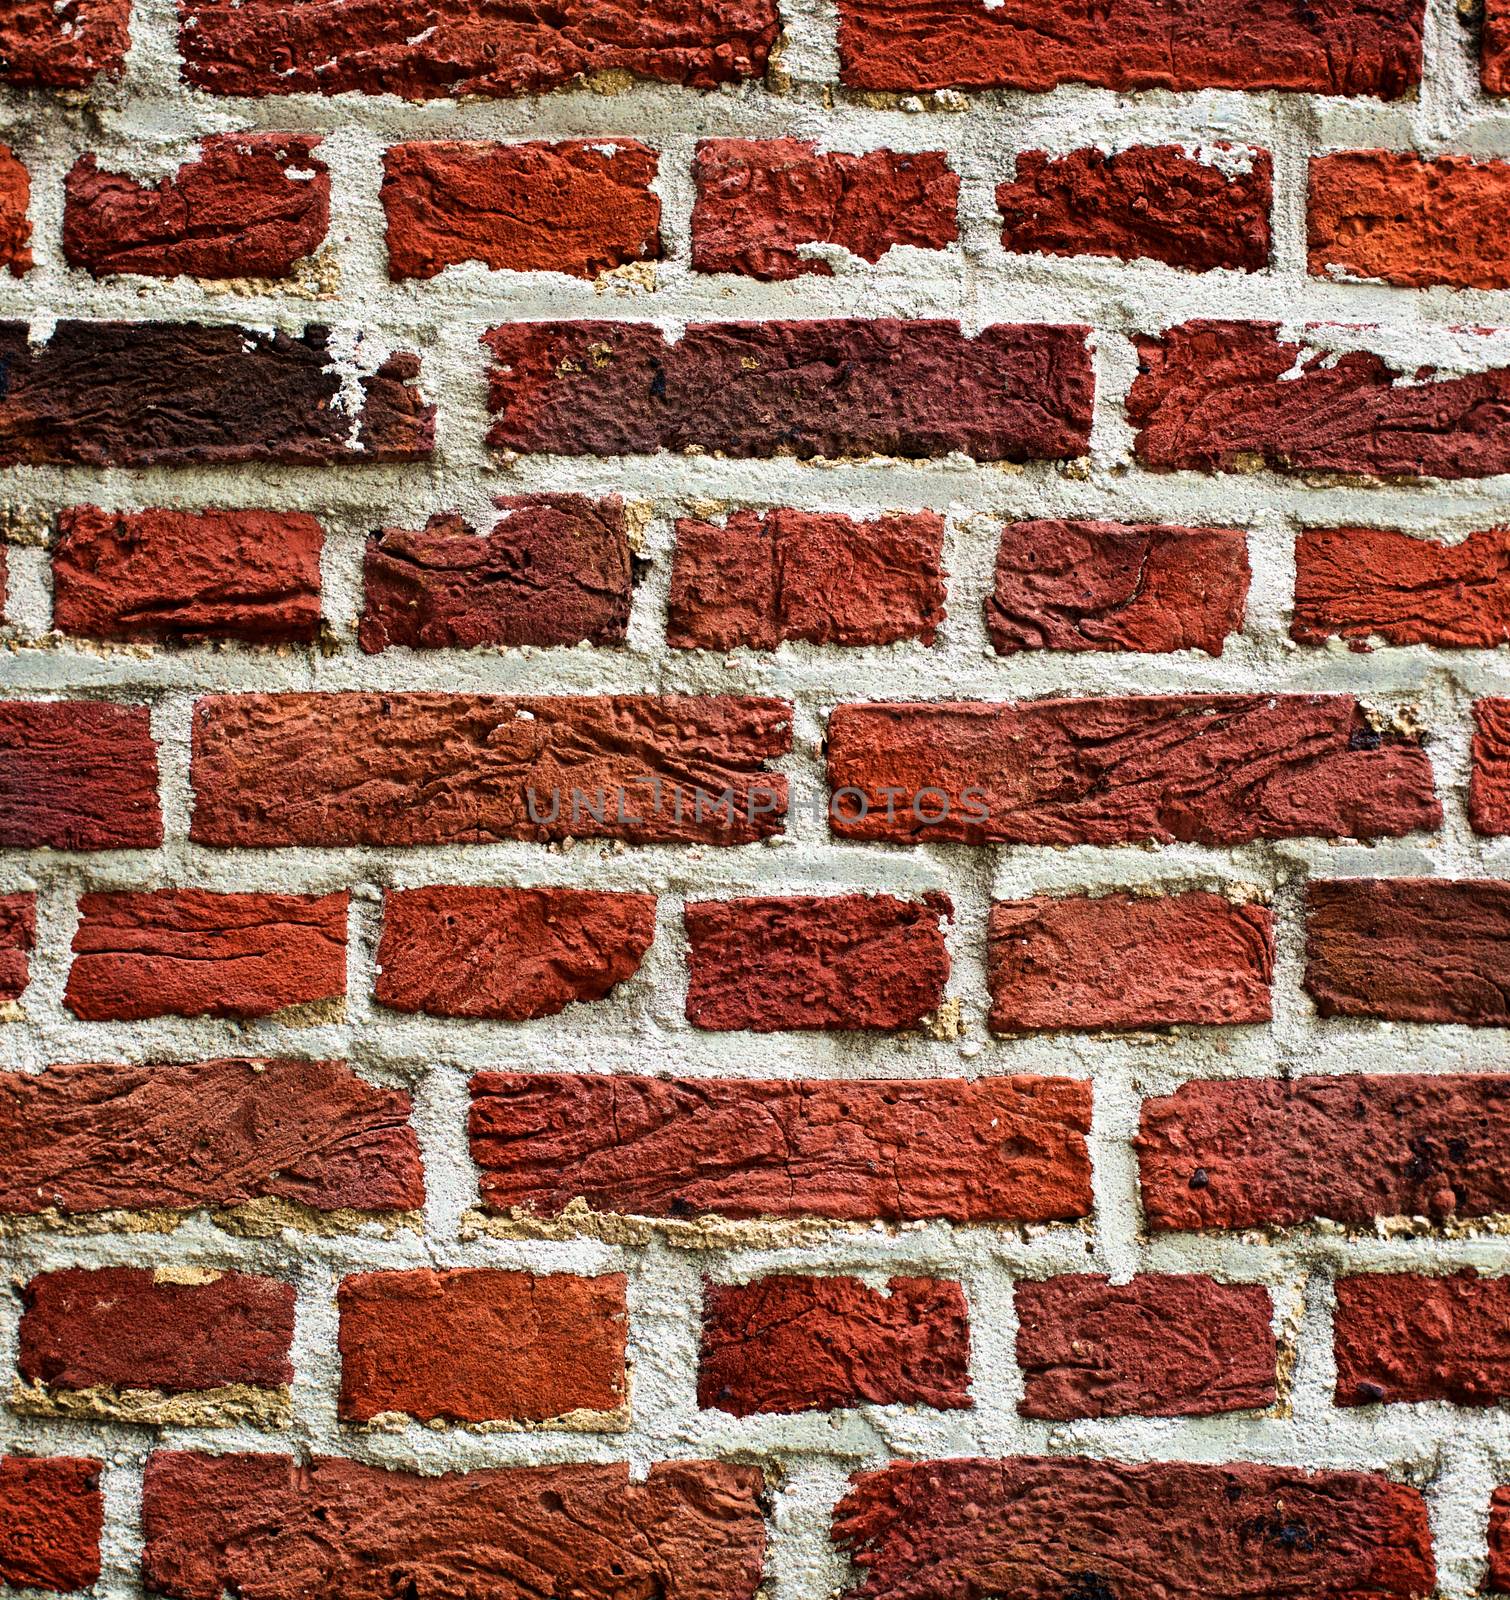 Background of Old Red Brick Wall with Cracked Concrete  closeup Outdoors